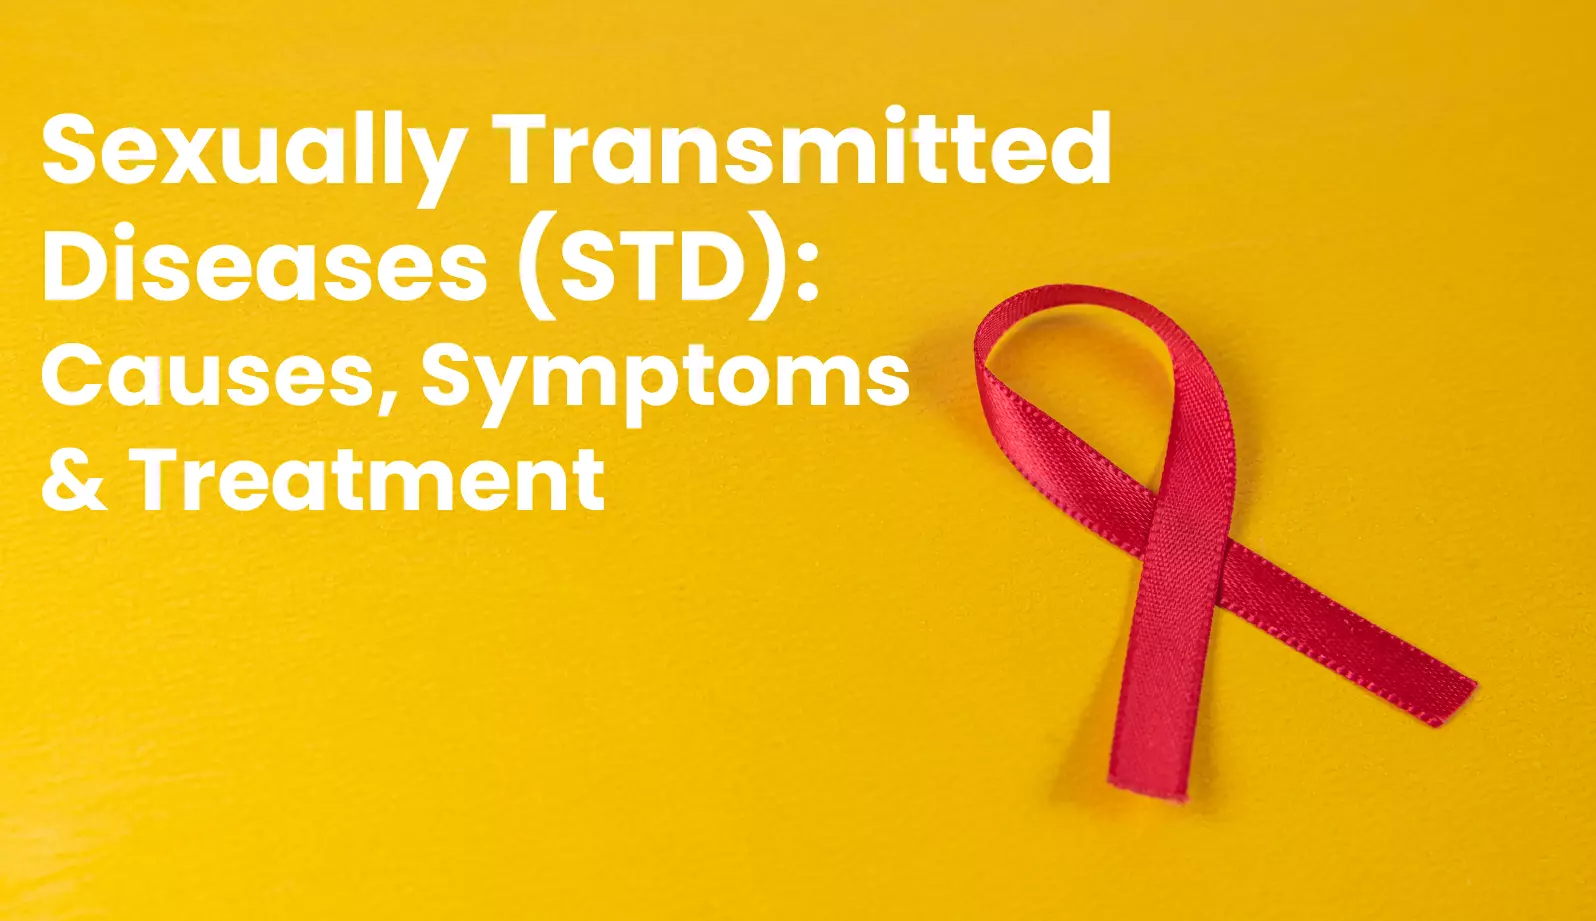 Sexually Transmitted Diseases (STD) Causes, Symptoms & Treatment